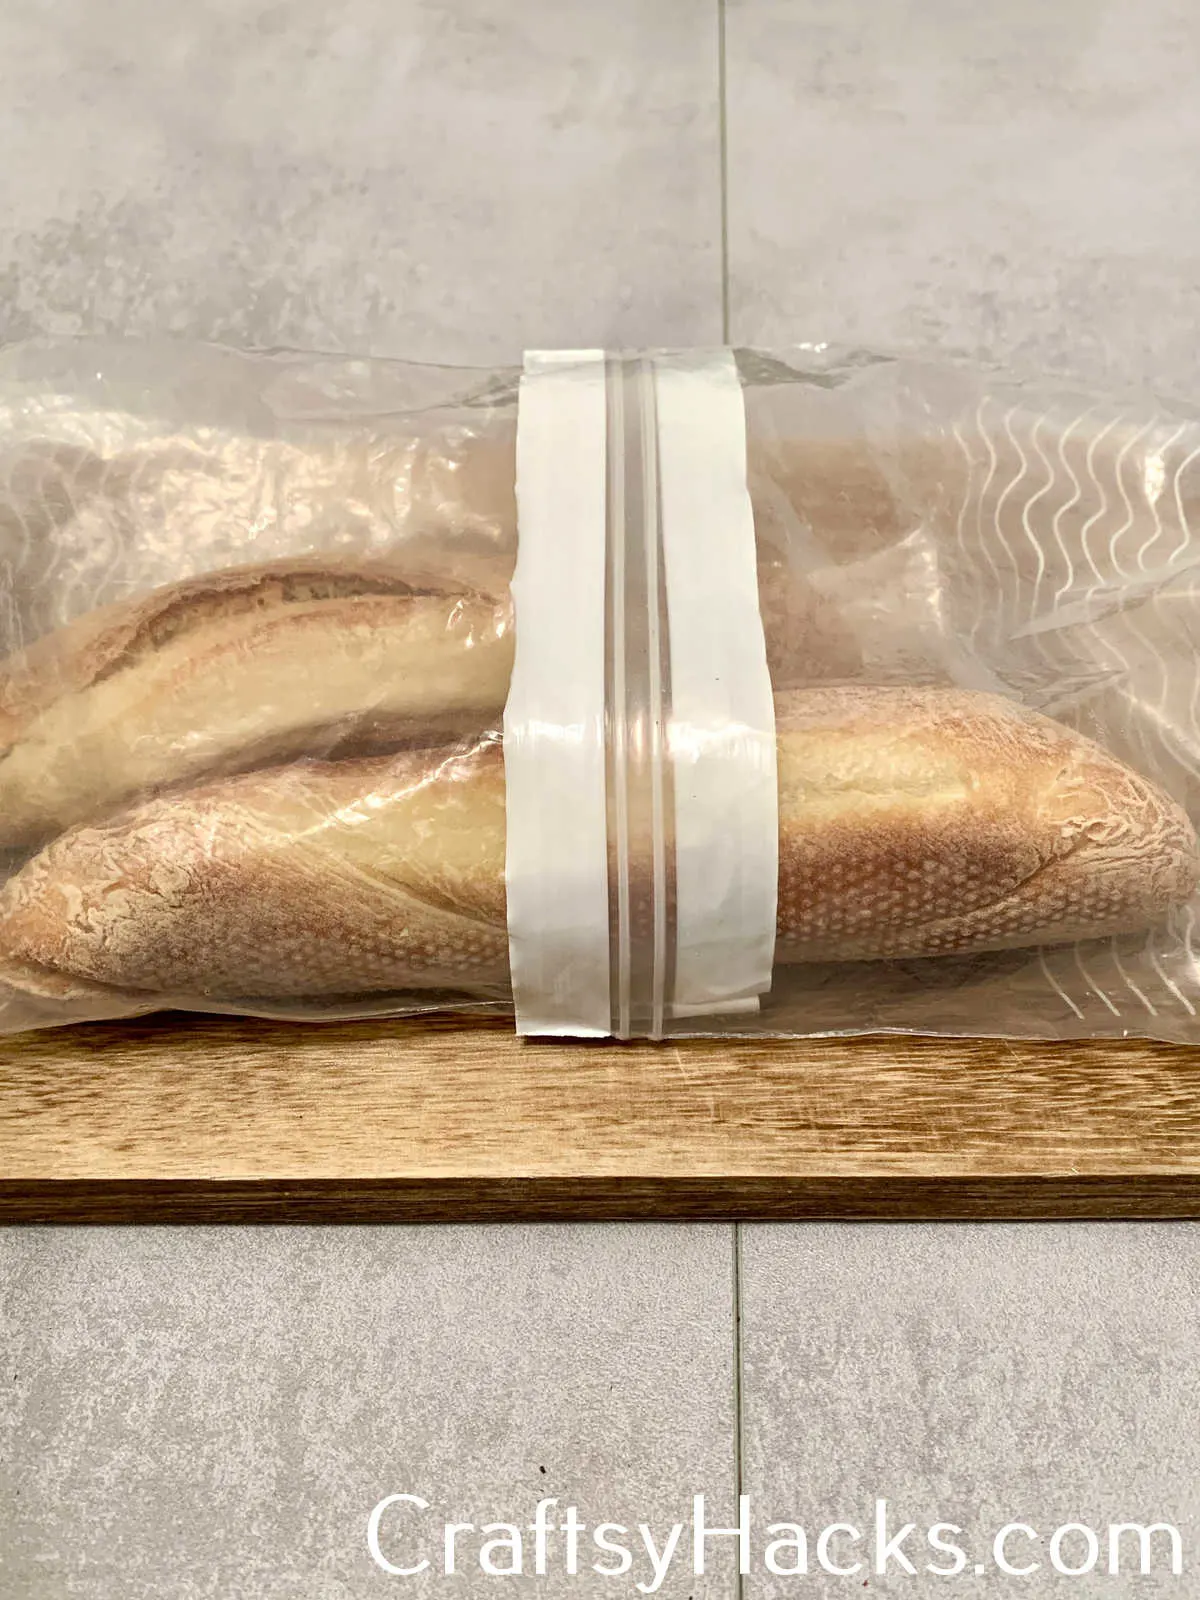 use two bags to store larger loafs of bread